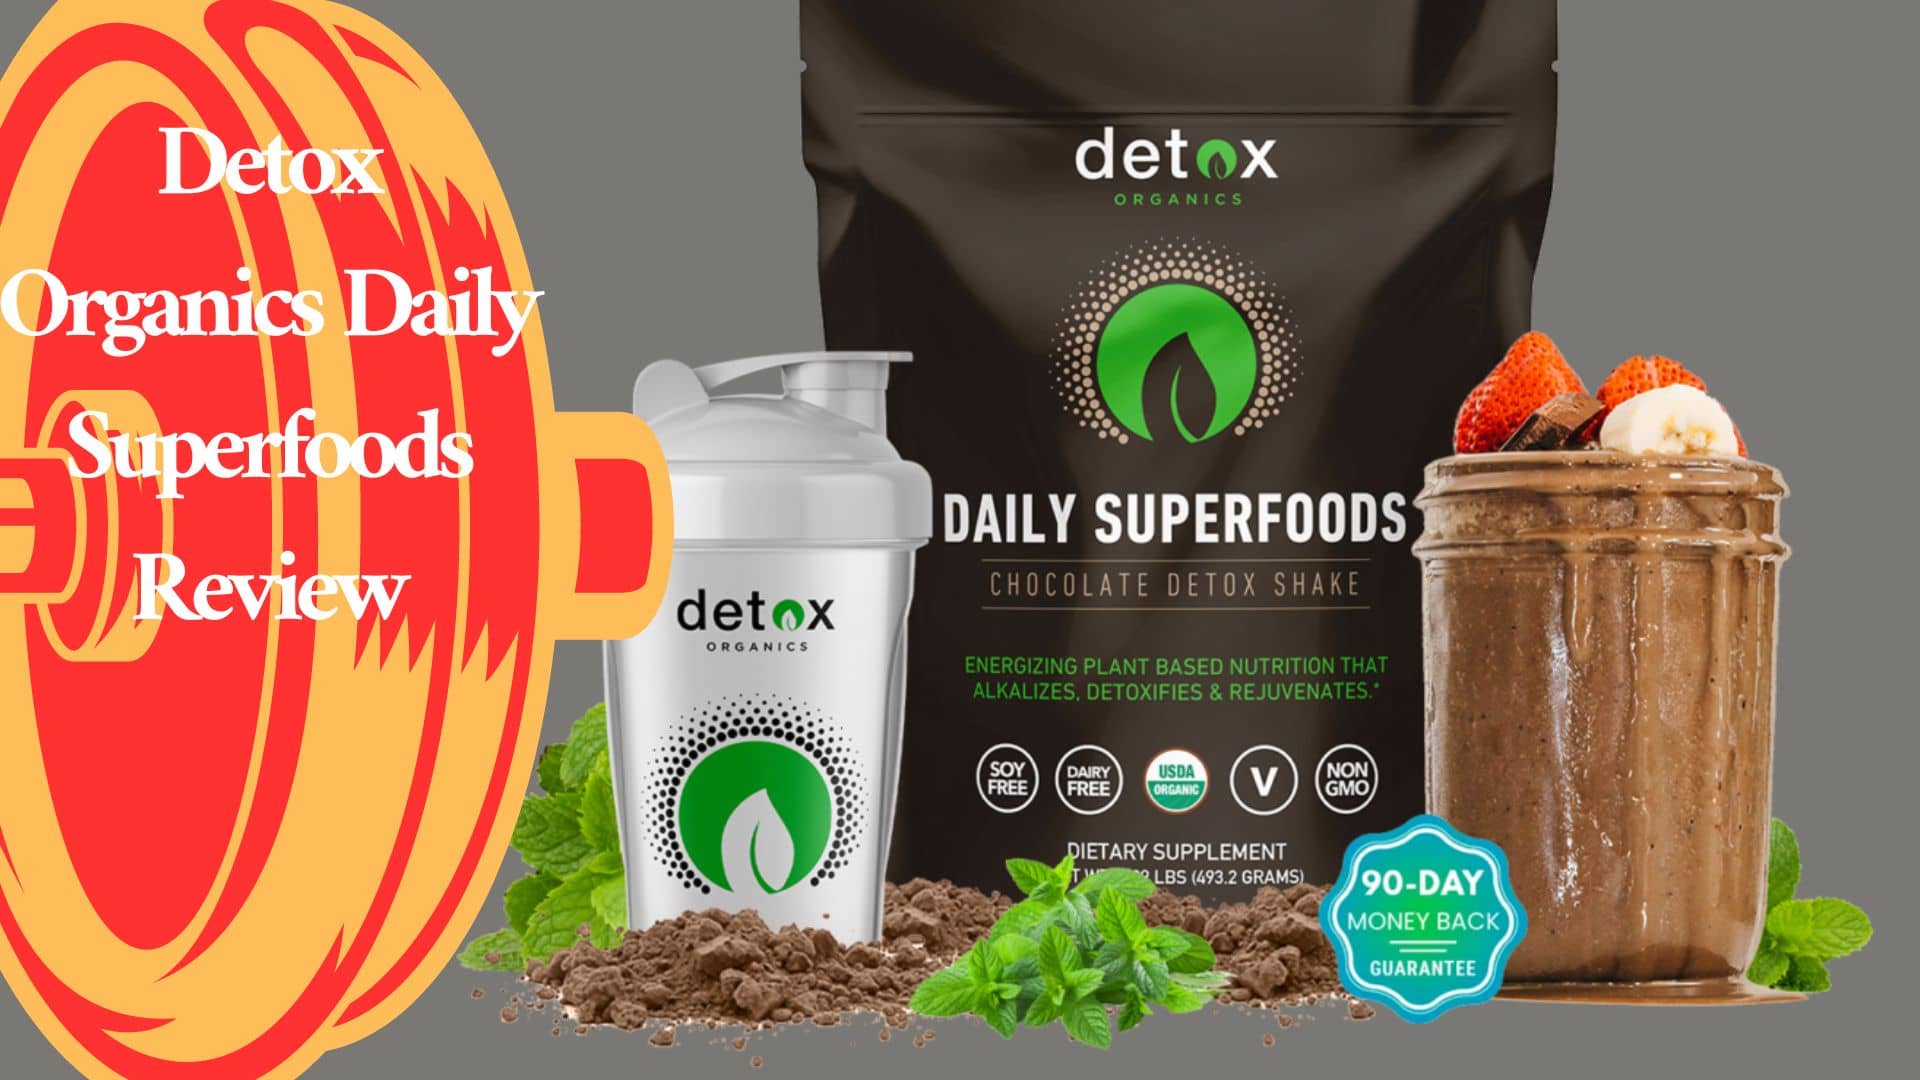 Detox Organics Daily Superfoods Review